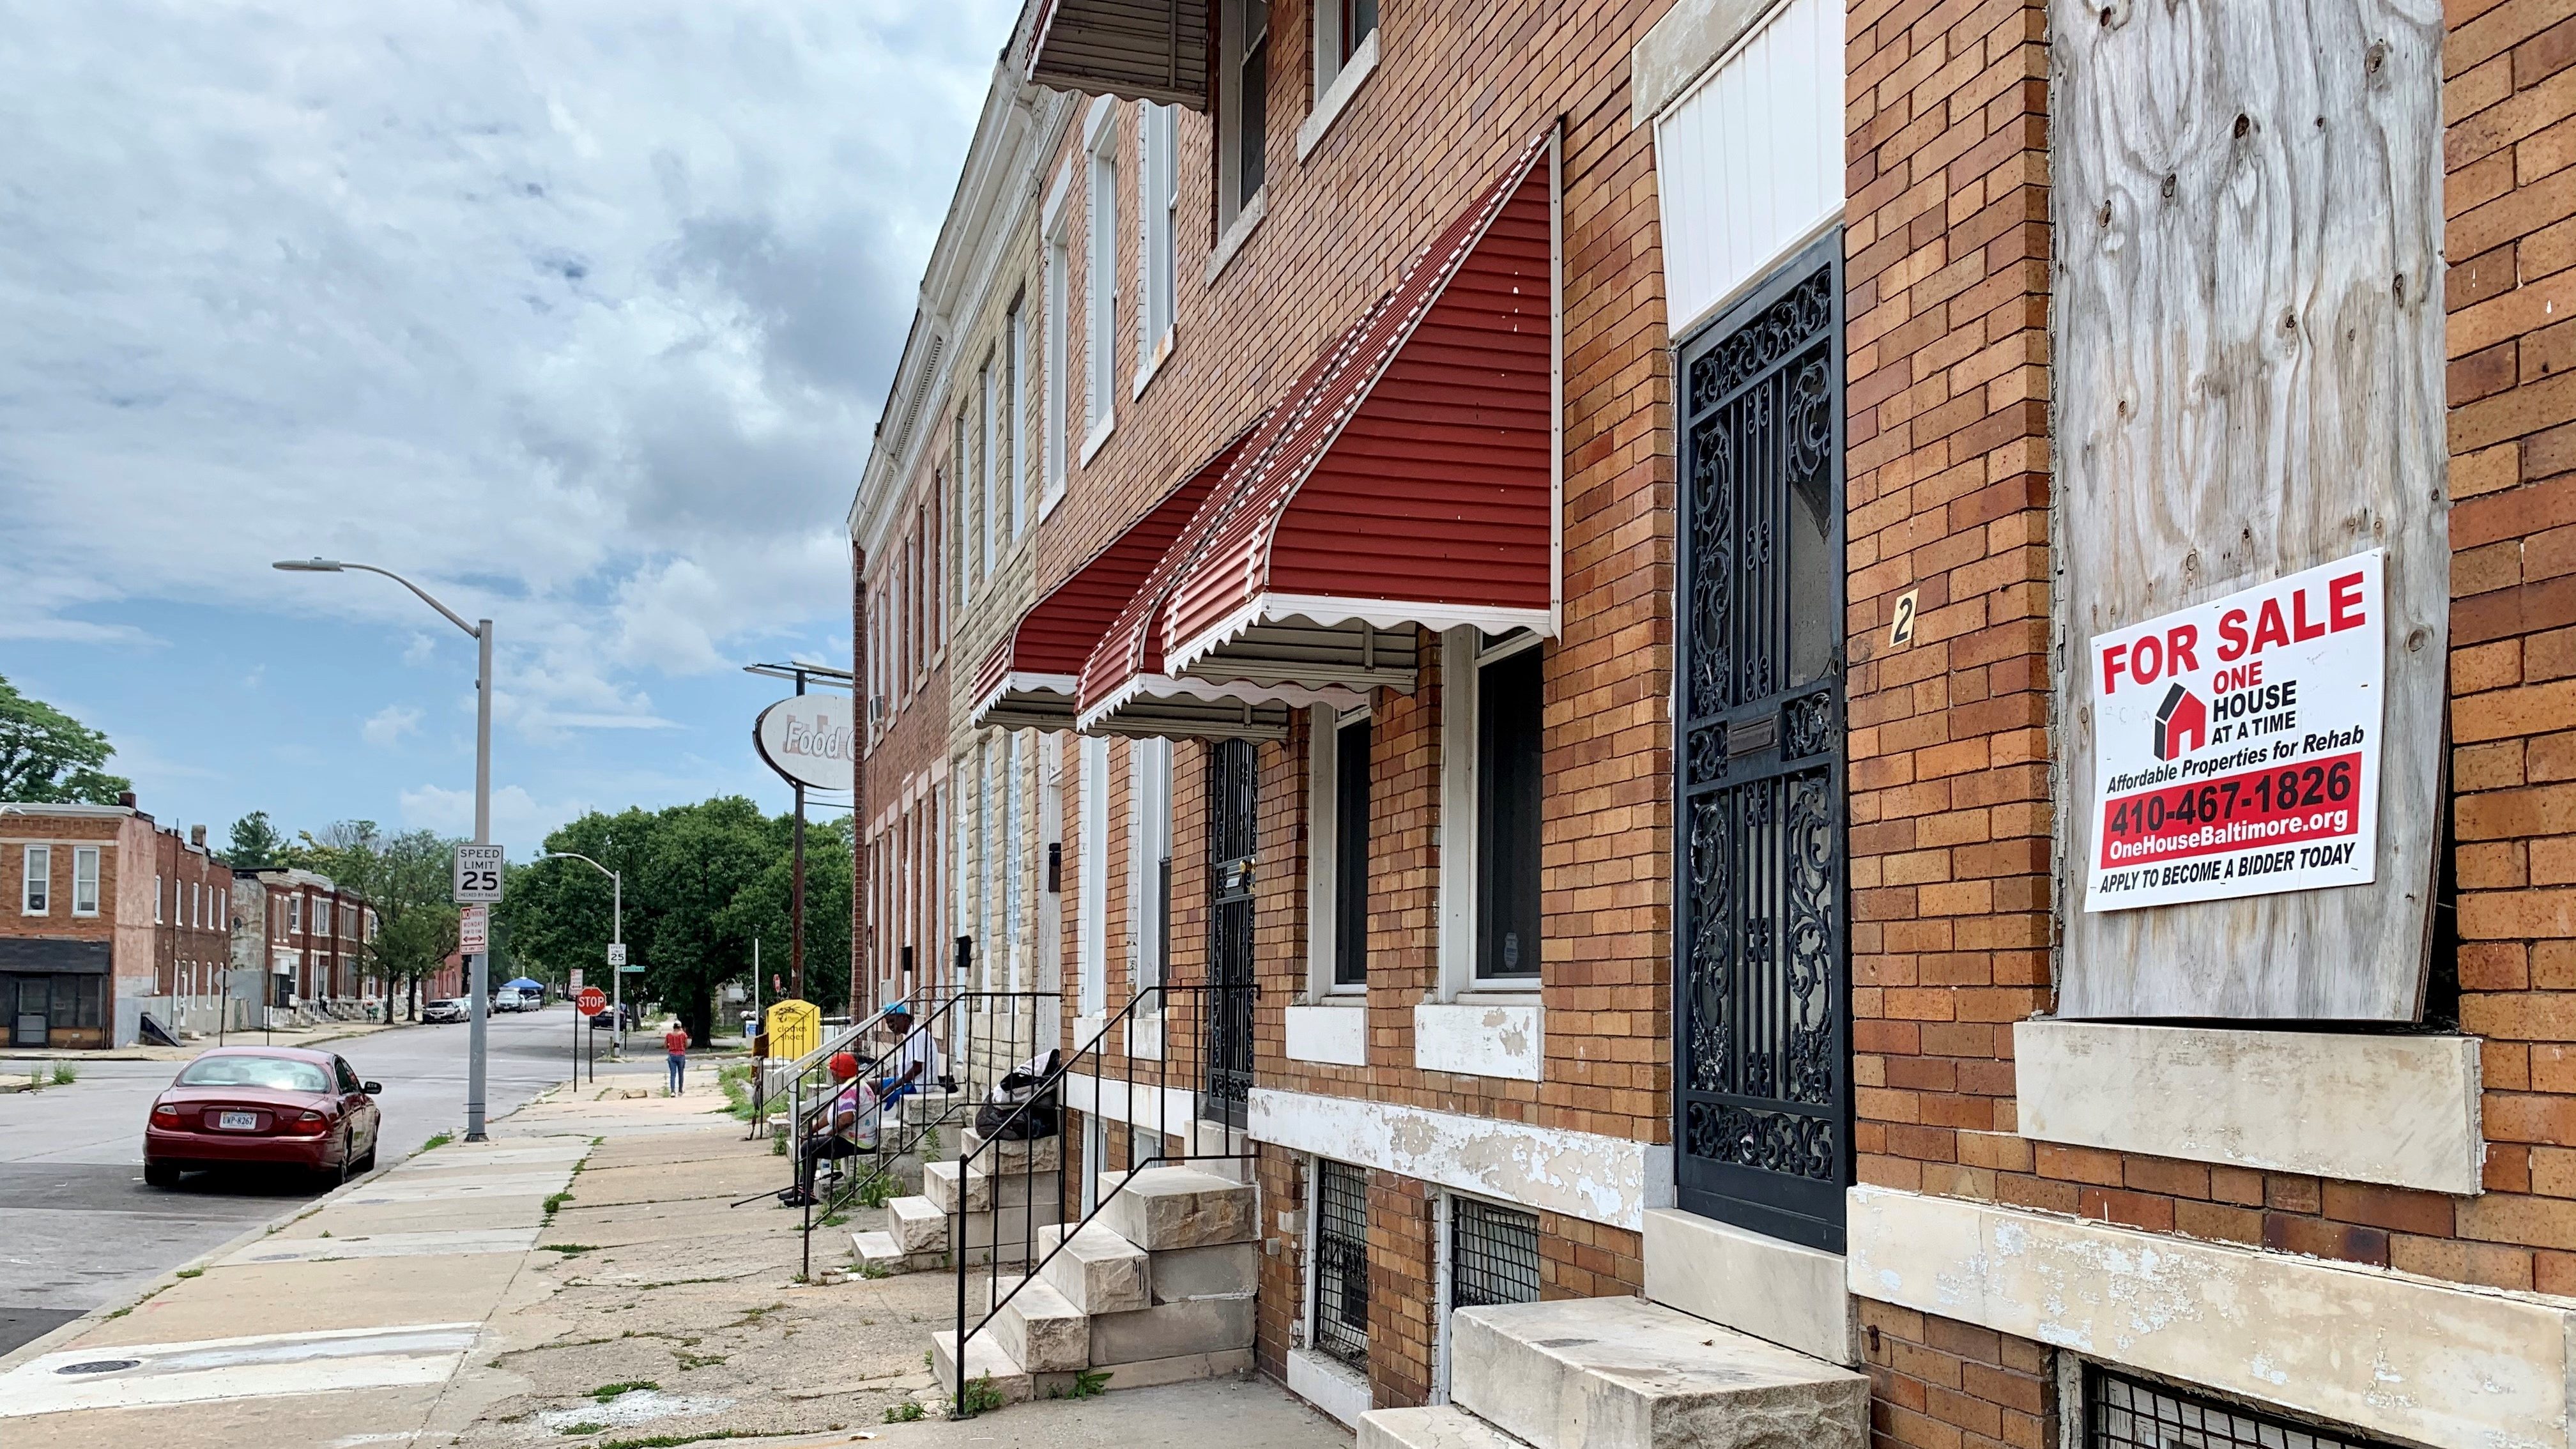 Why can't Baltimore solve its vacant housing problem? - Marketplace